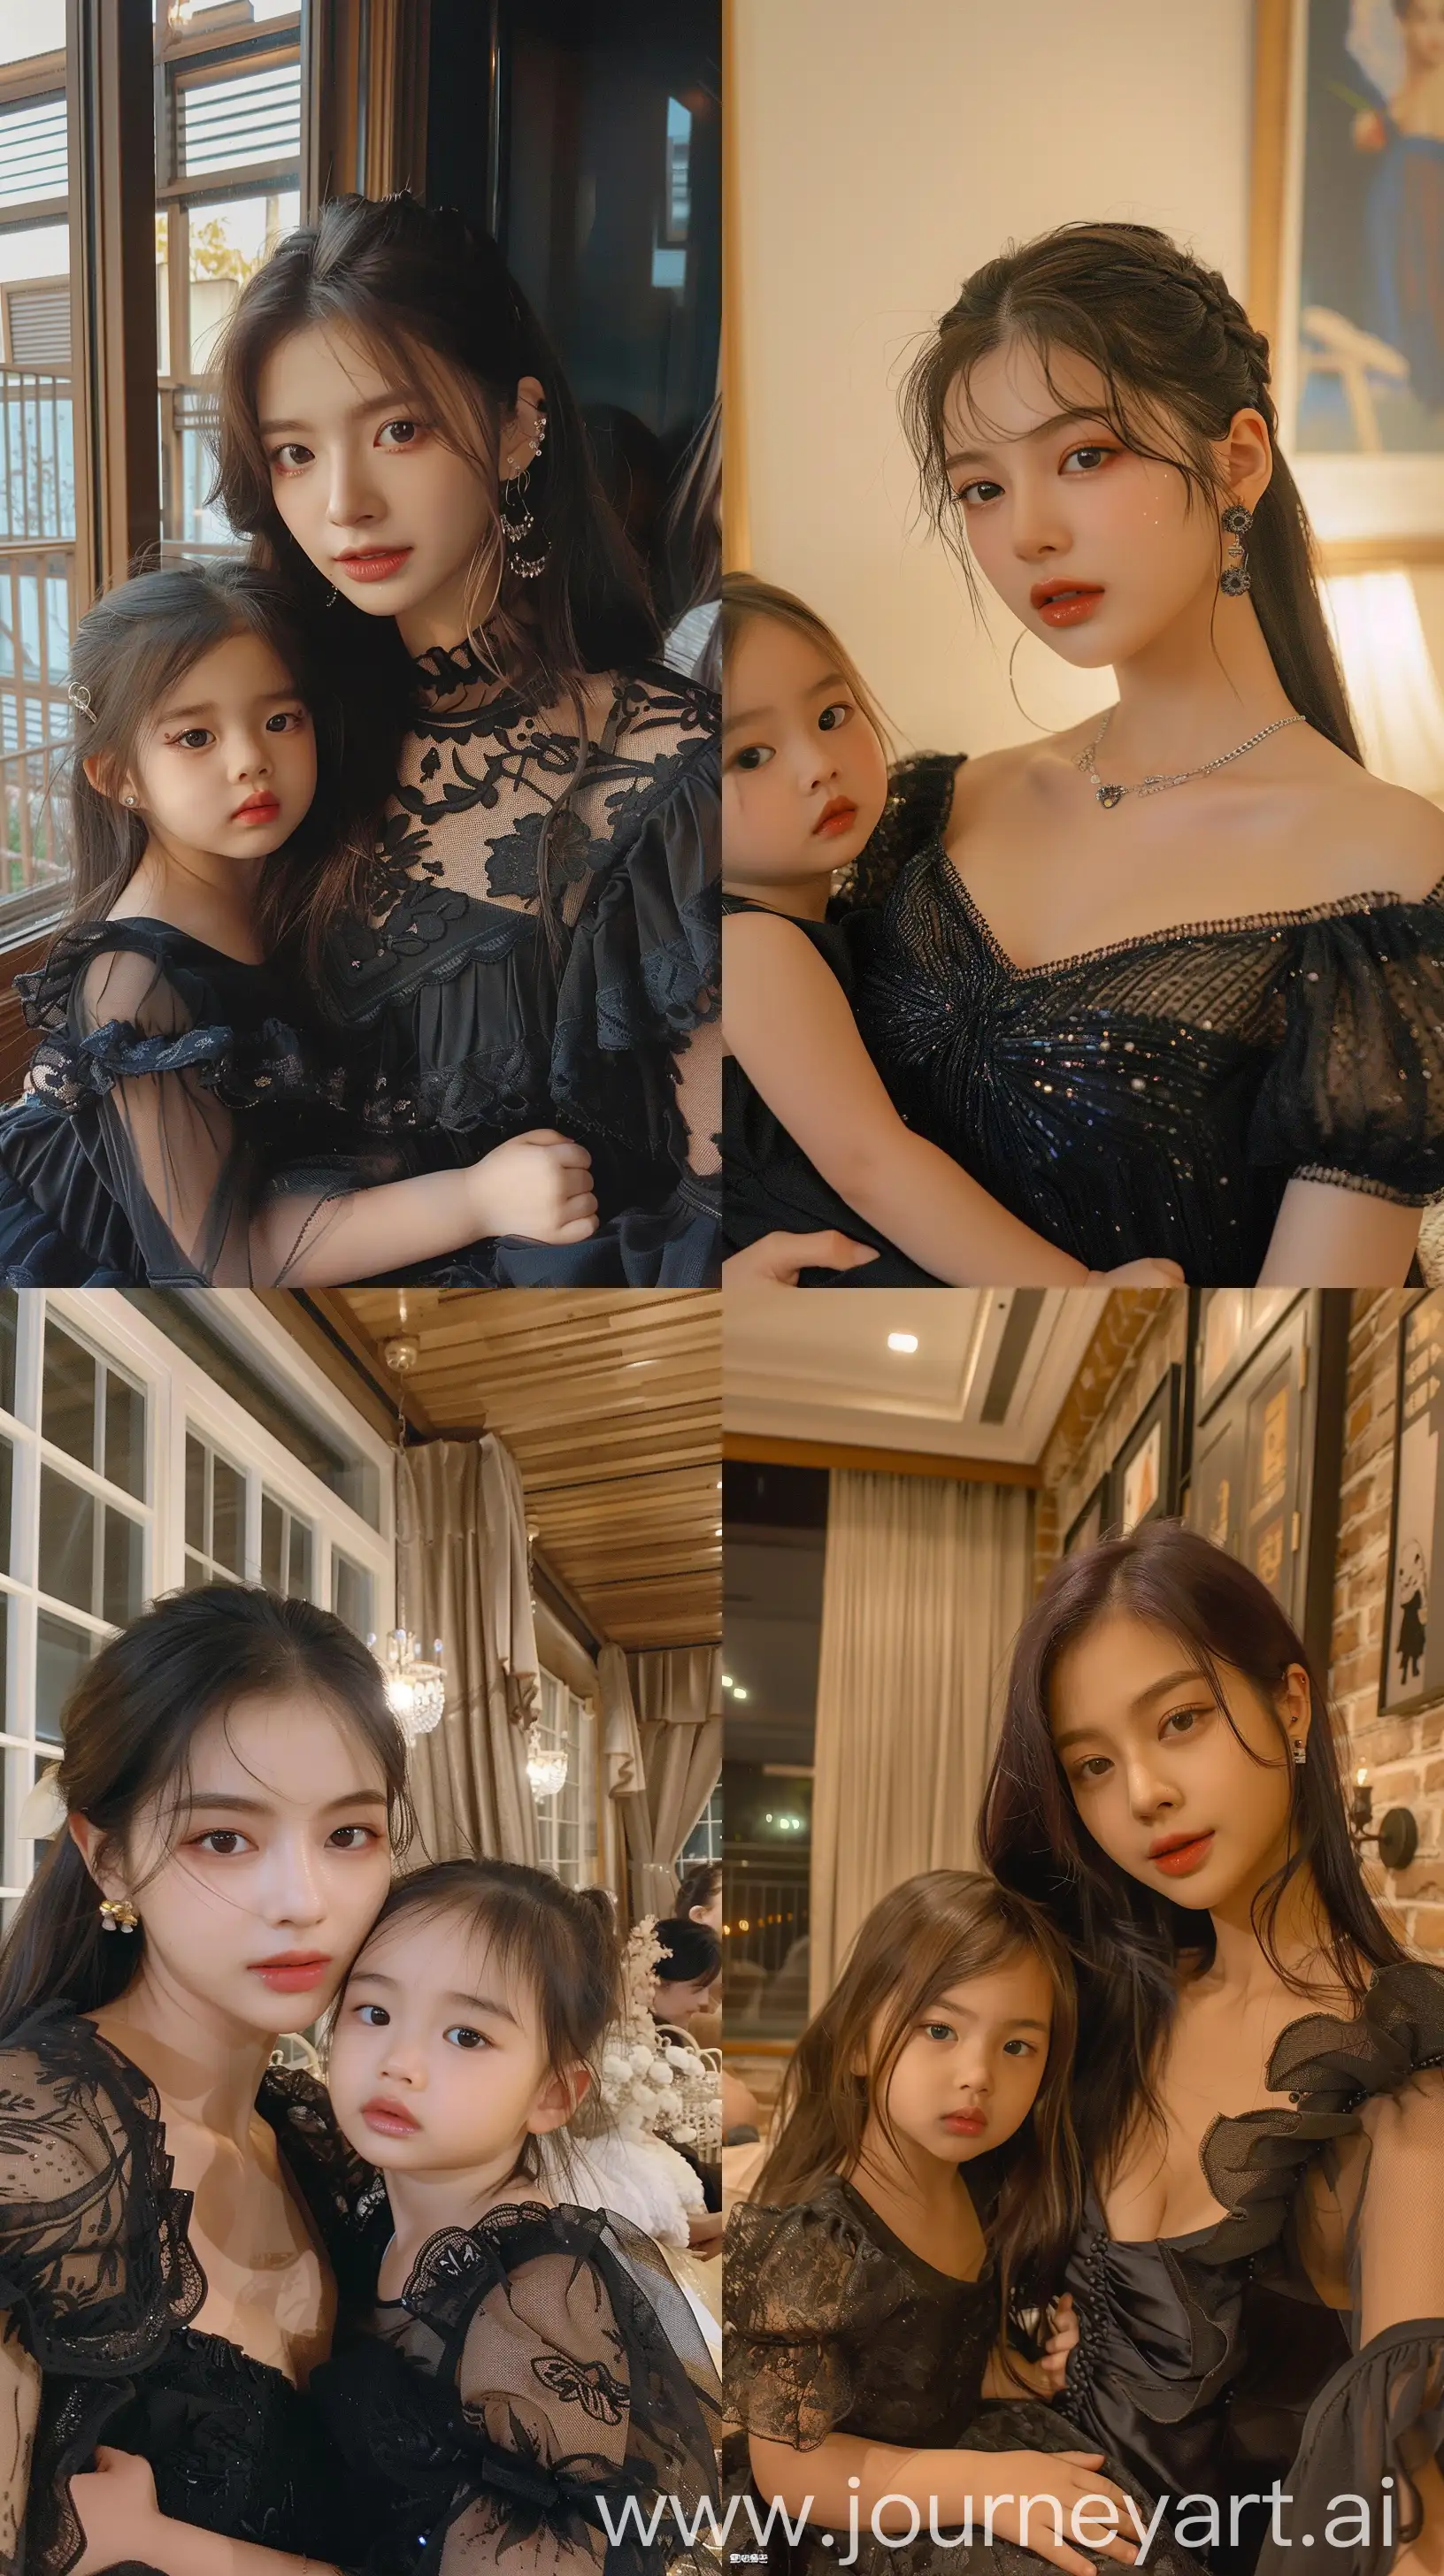 blackpink's jennie,holding 2 years old girl, facial feature look a like blackpink's jennie, aestethic selfie, night times, aestethic make up, wearing black elegant dress --ar 9:16 --stylize 250